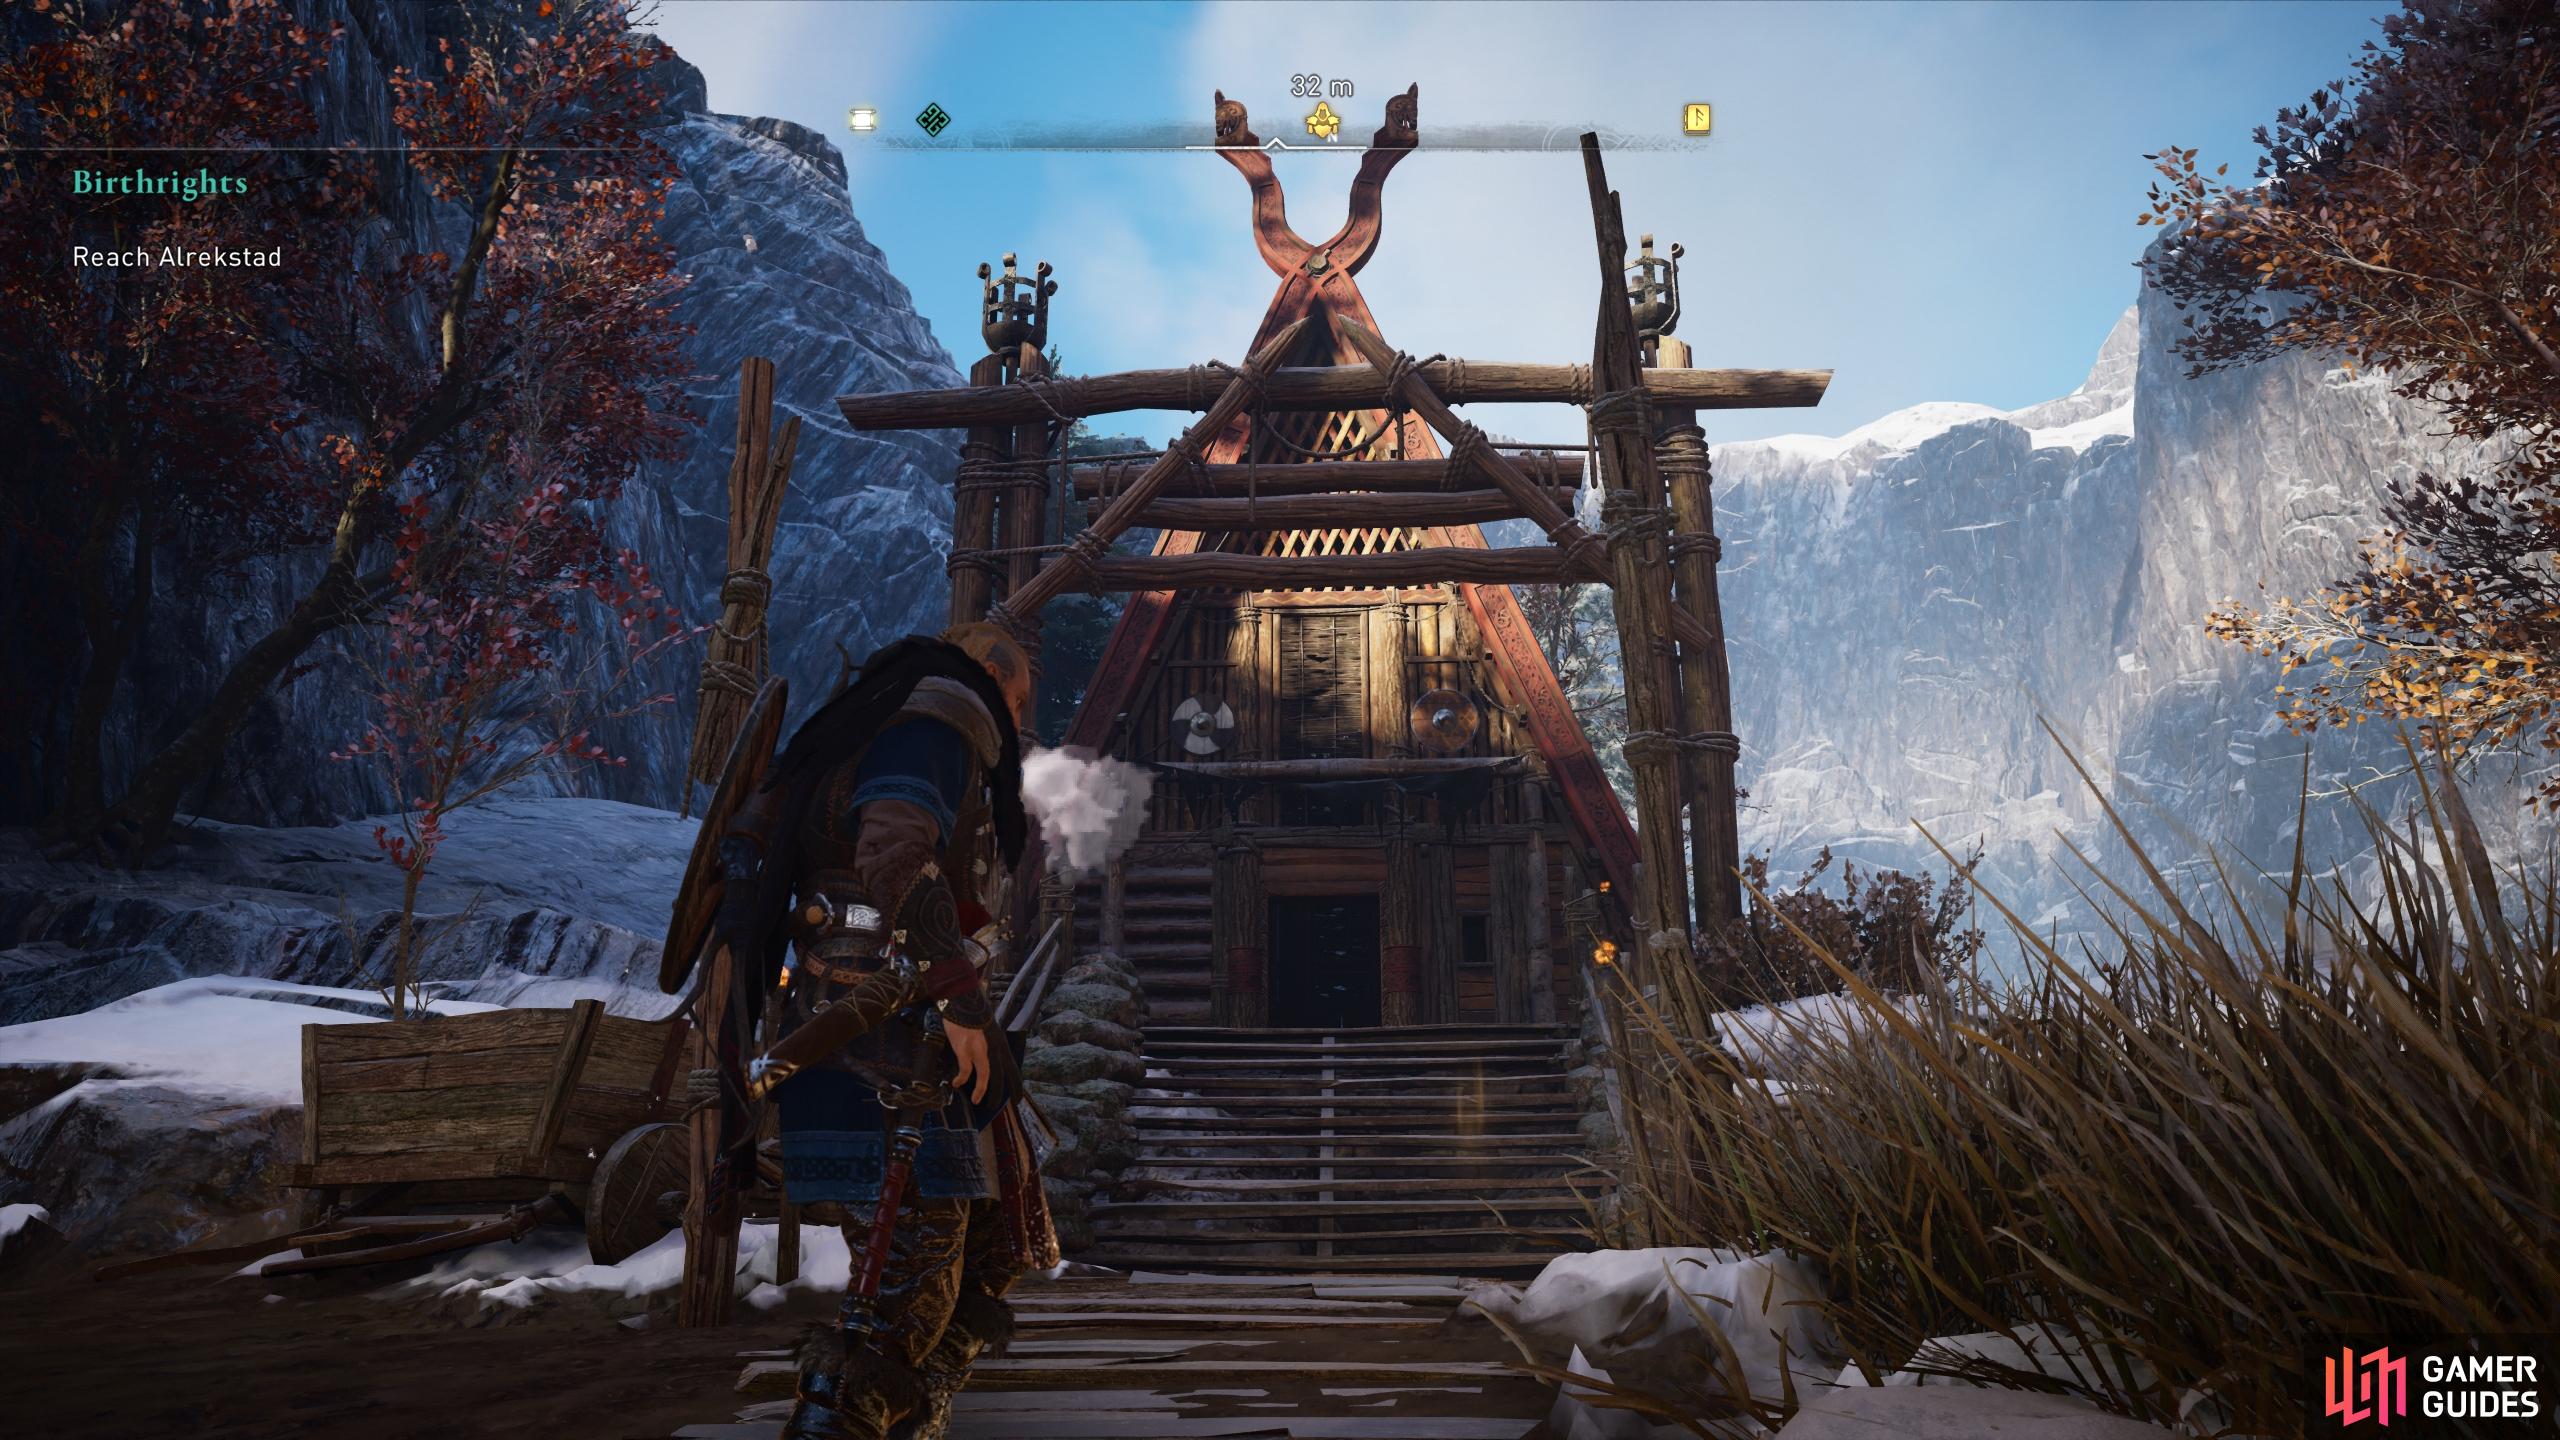 The triangular building, within which you'll find a treasure chest containing the unique weapon, Iron-Star.